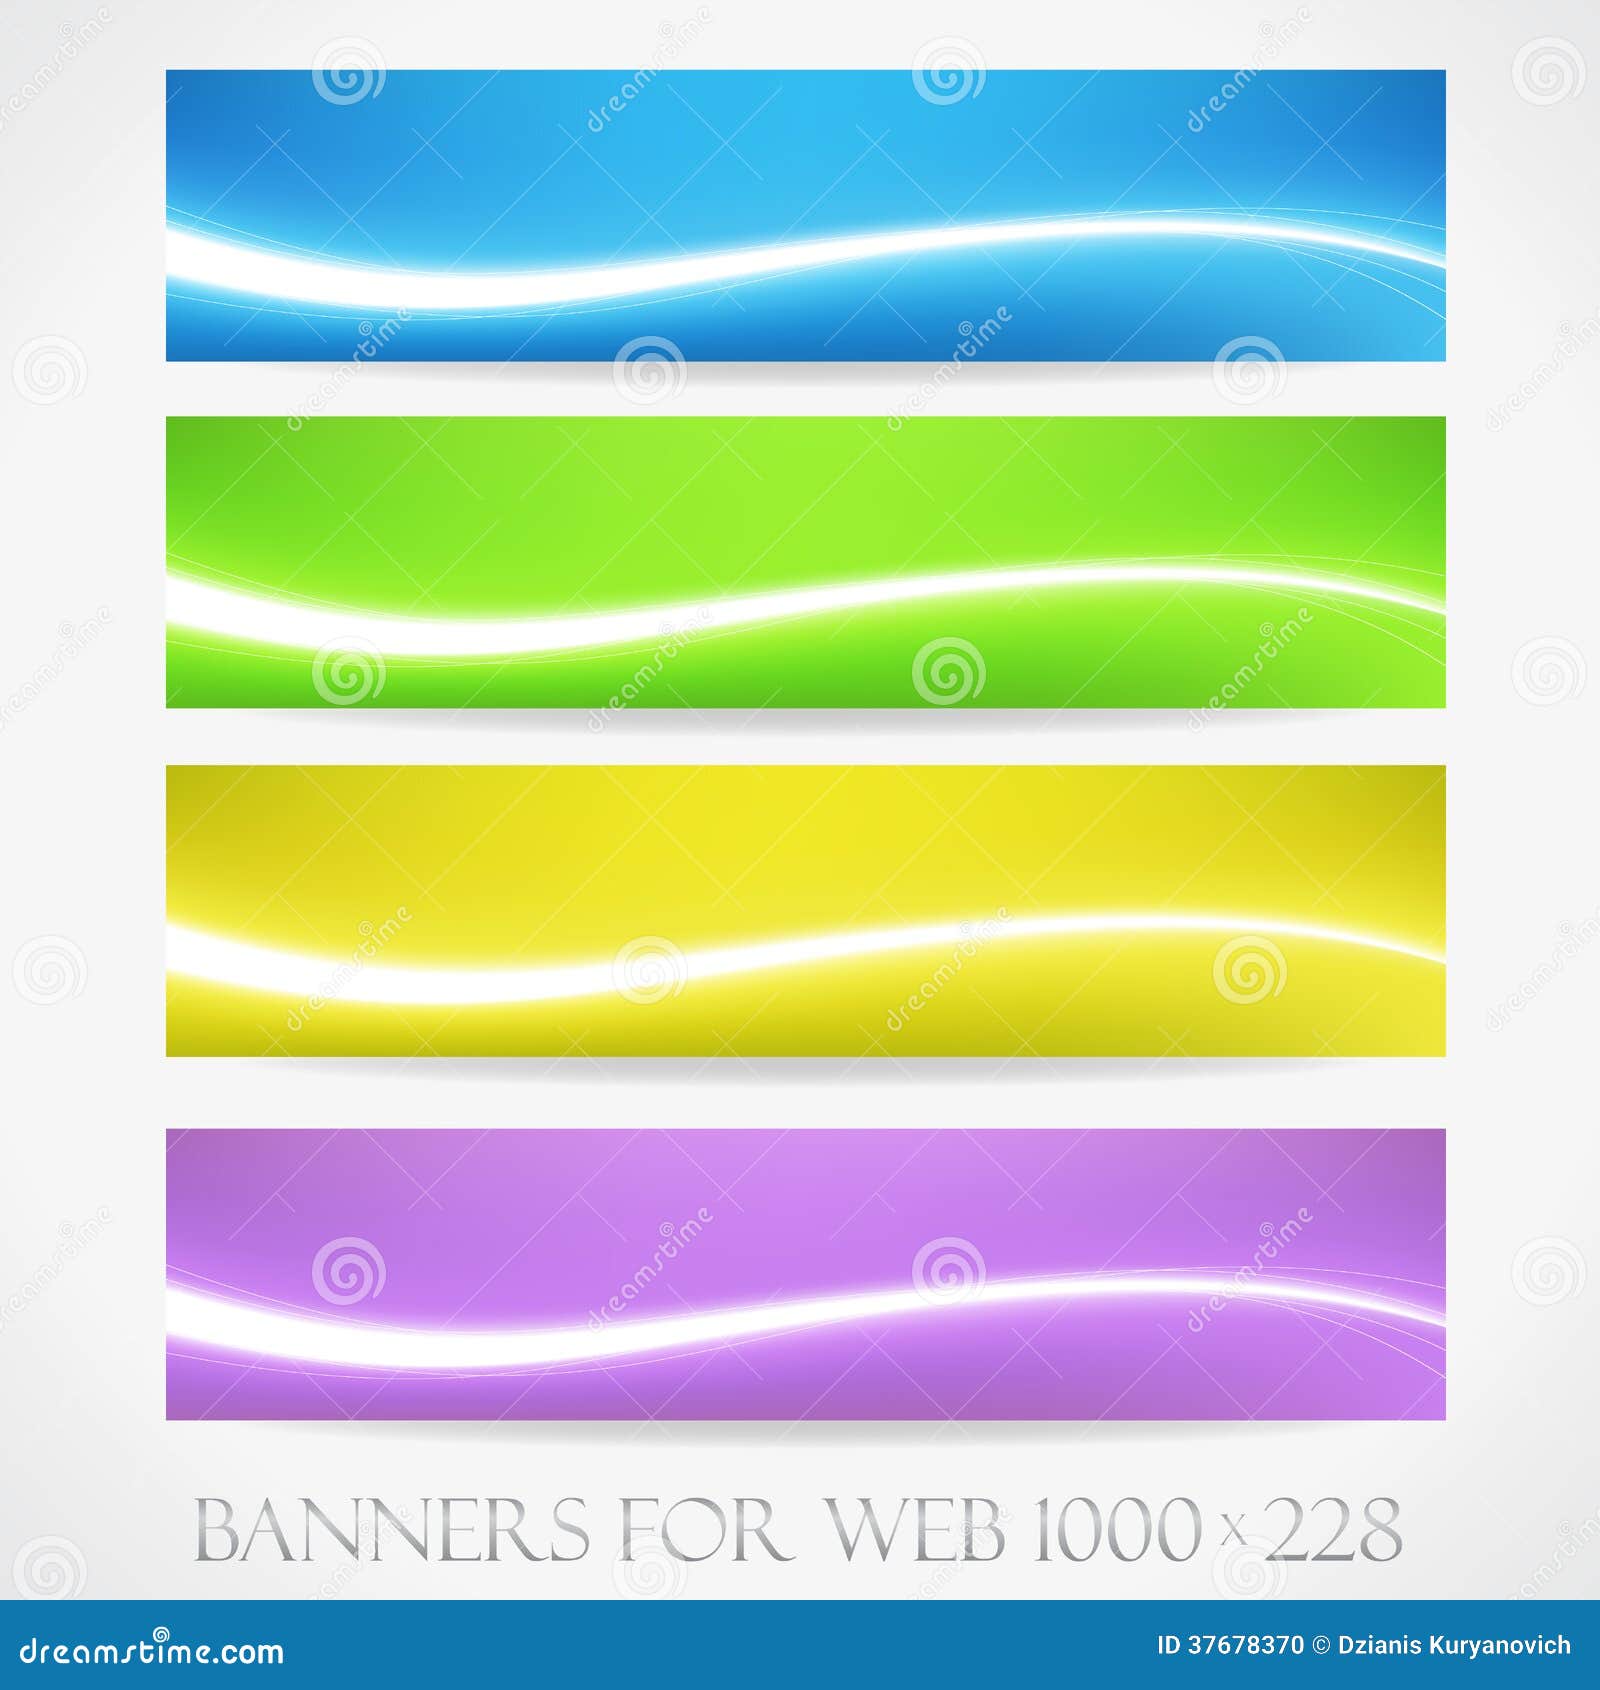 clipart web collection - photo #27